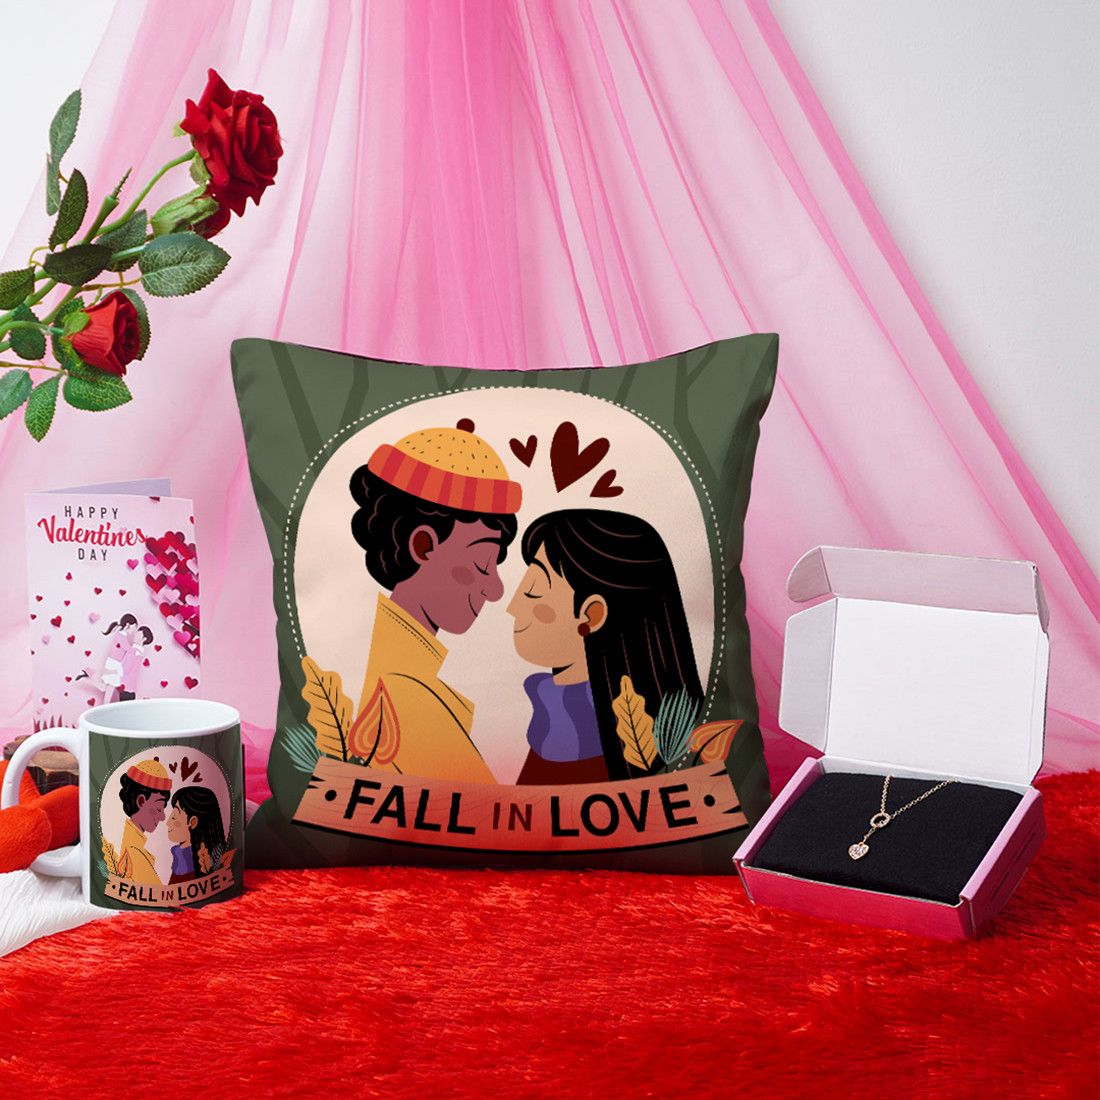 Buy Love Gifts | Romantic Gifts | Order Online and Get Up to 60% Off